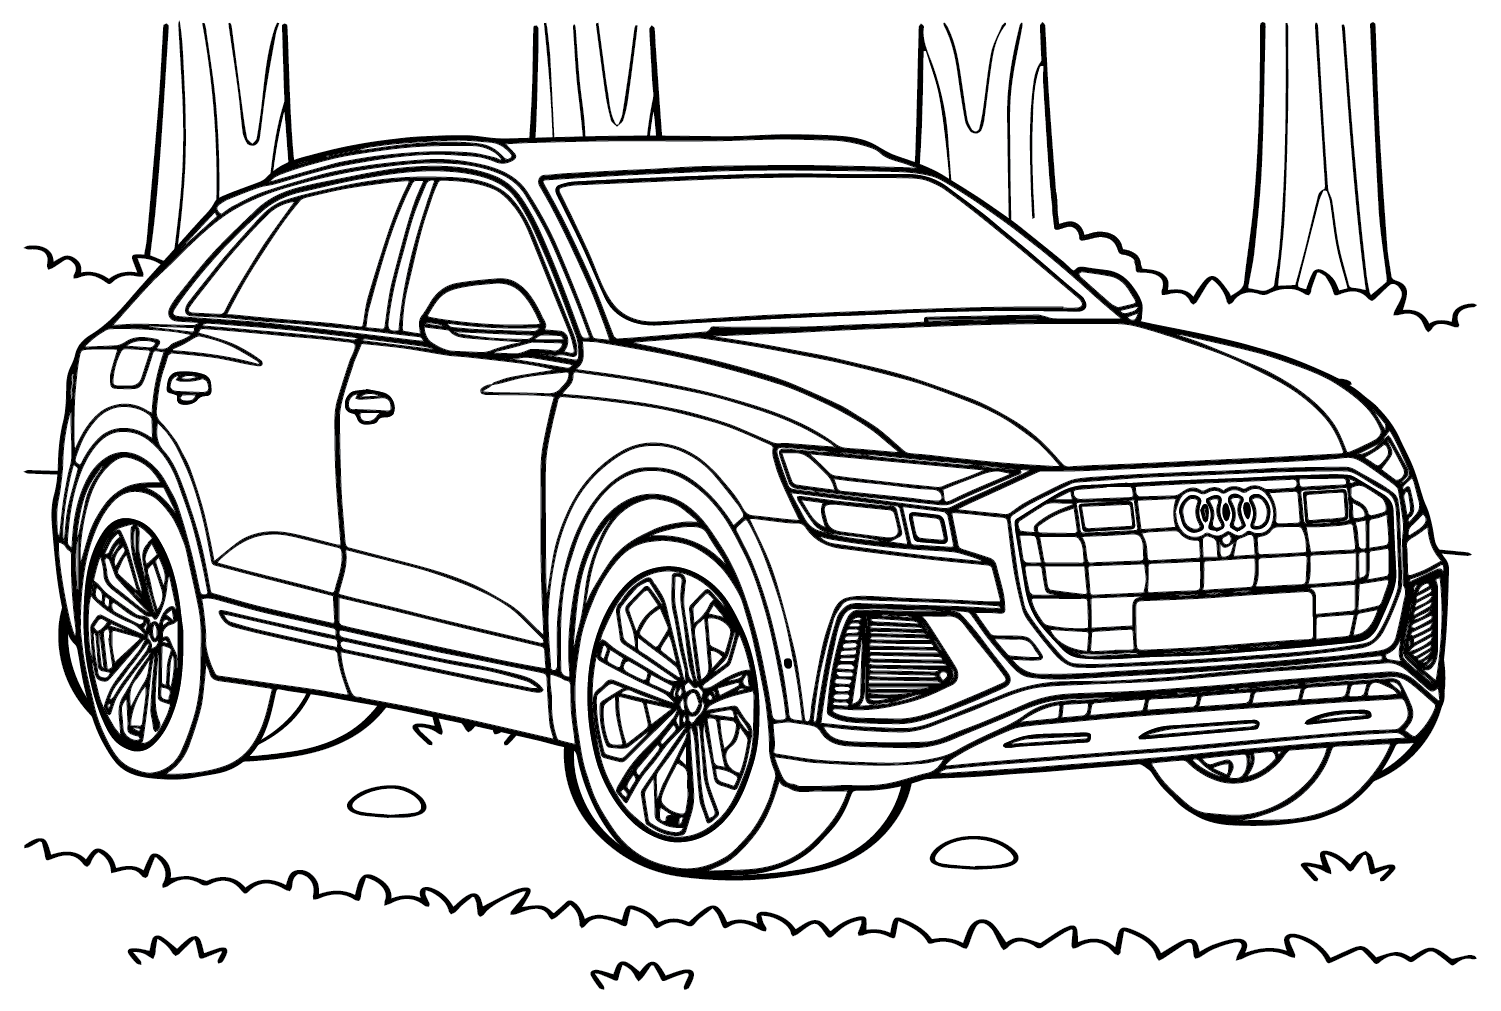 Audi Q8 45 TDI quattro Color Page - Free Printable Coloring Pages